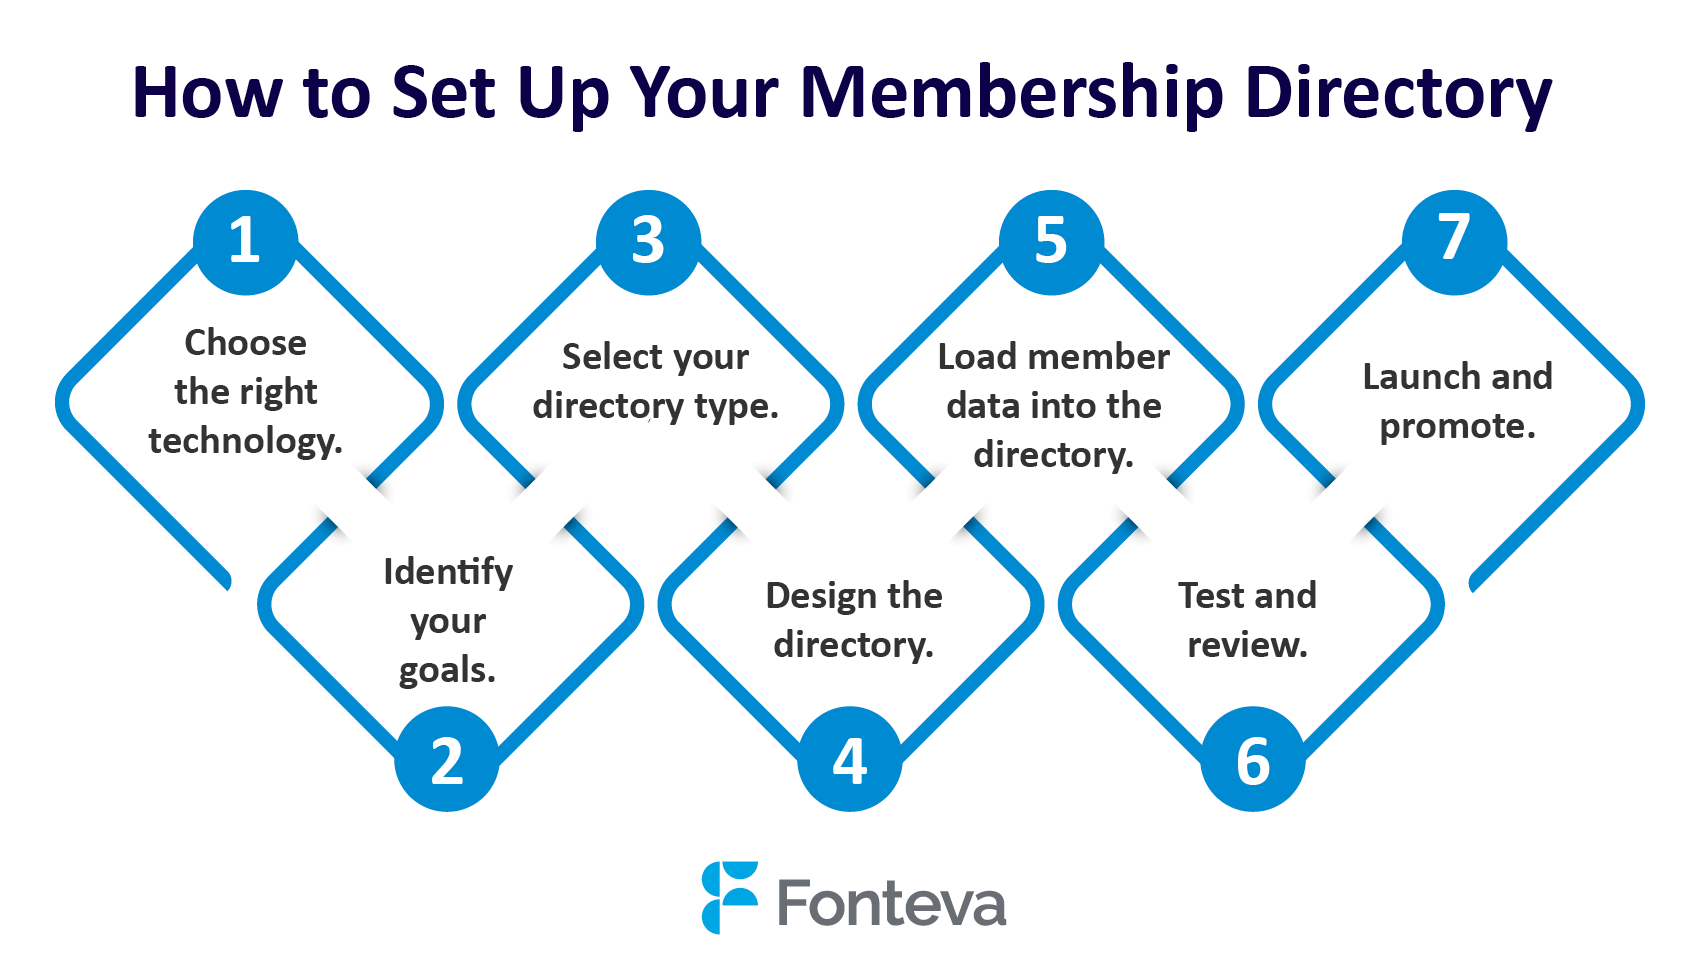 The process for setting up a membership directory (detailed in the text below).